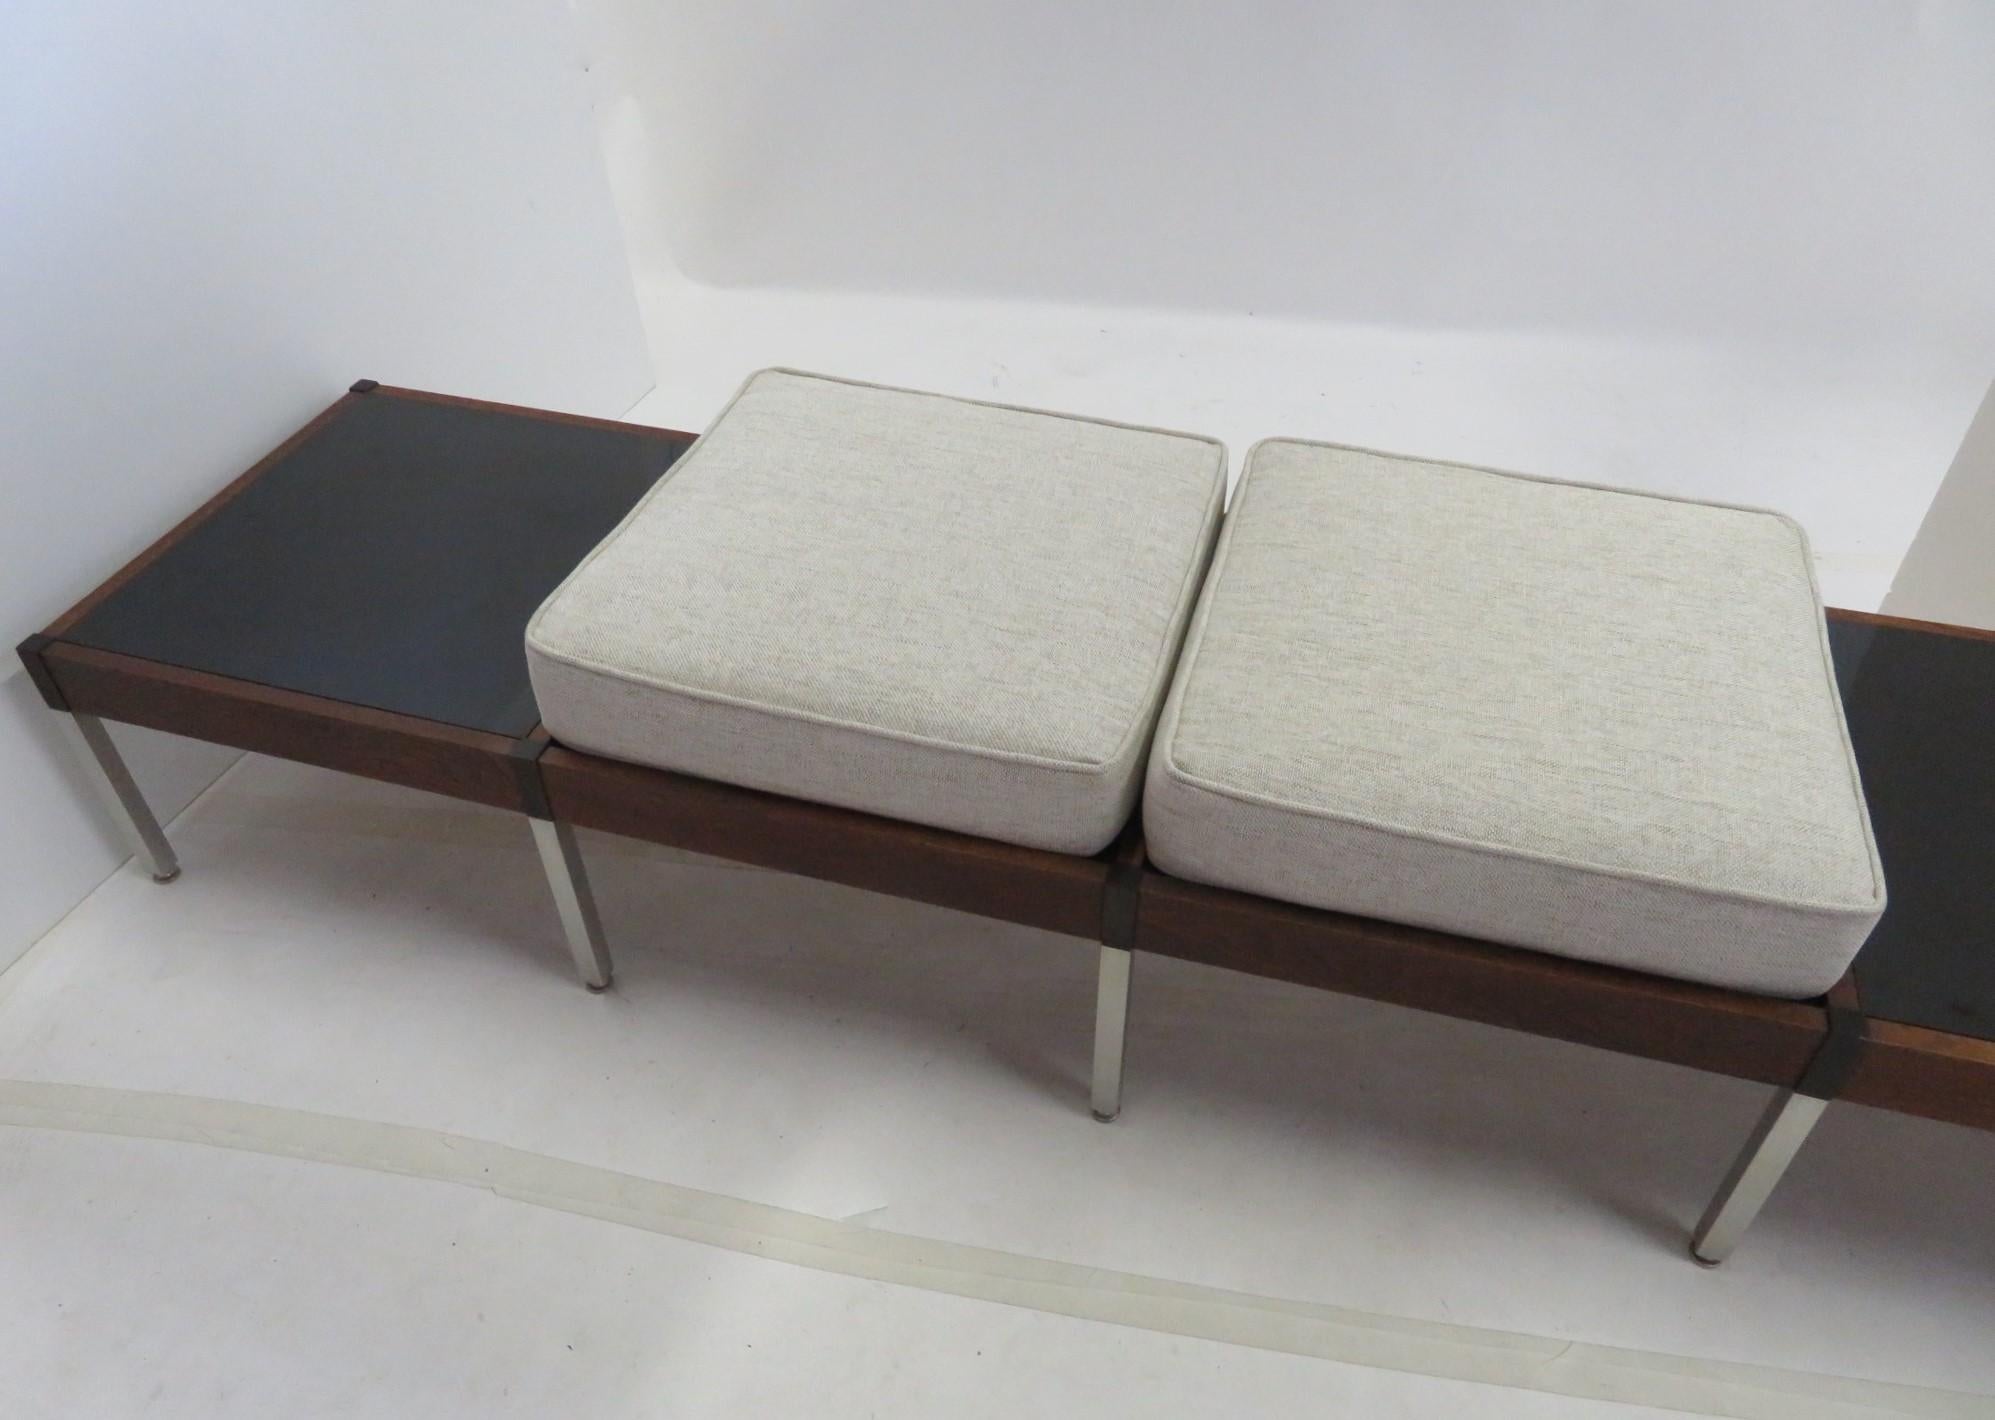 Brushed 1960s Knoll Style Long Bench with Movable Cushions by Camilo Furniture of Miami